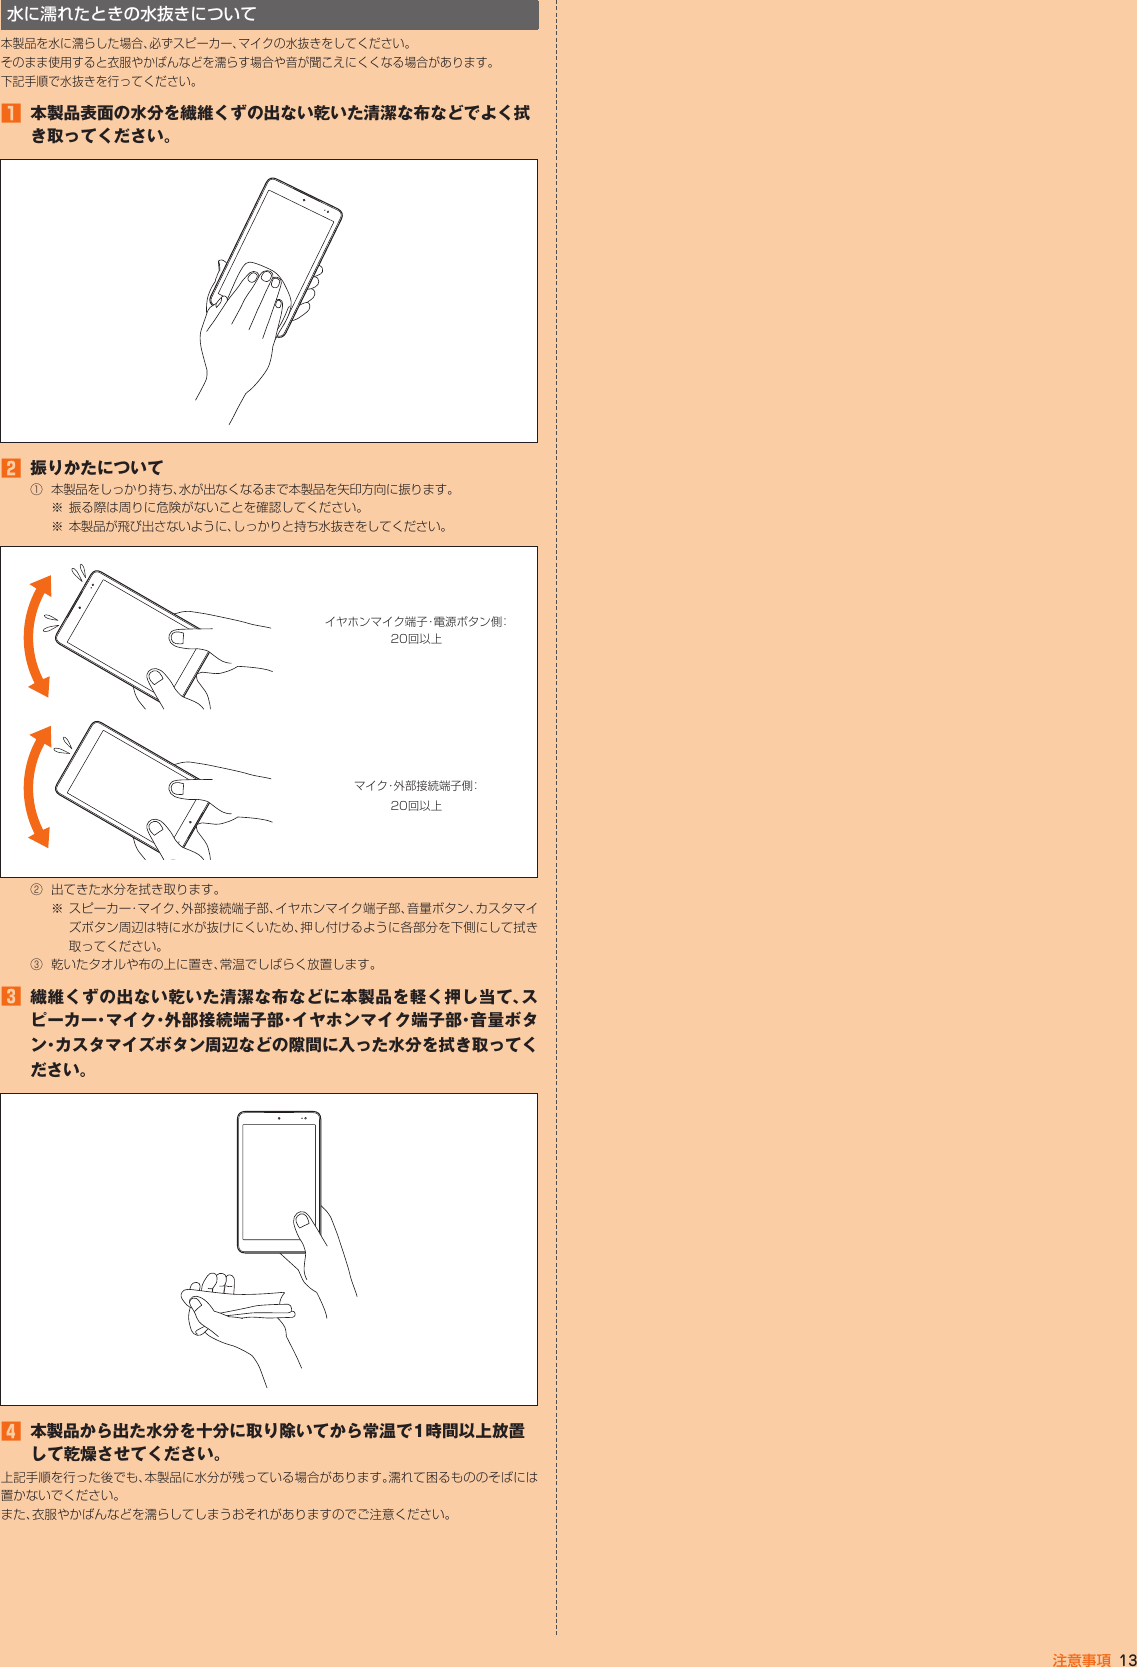 Page 13 of Kyocera FA51 Tablet User Manual part 2